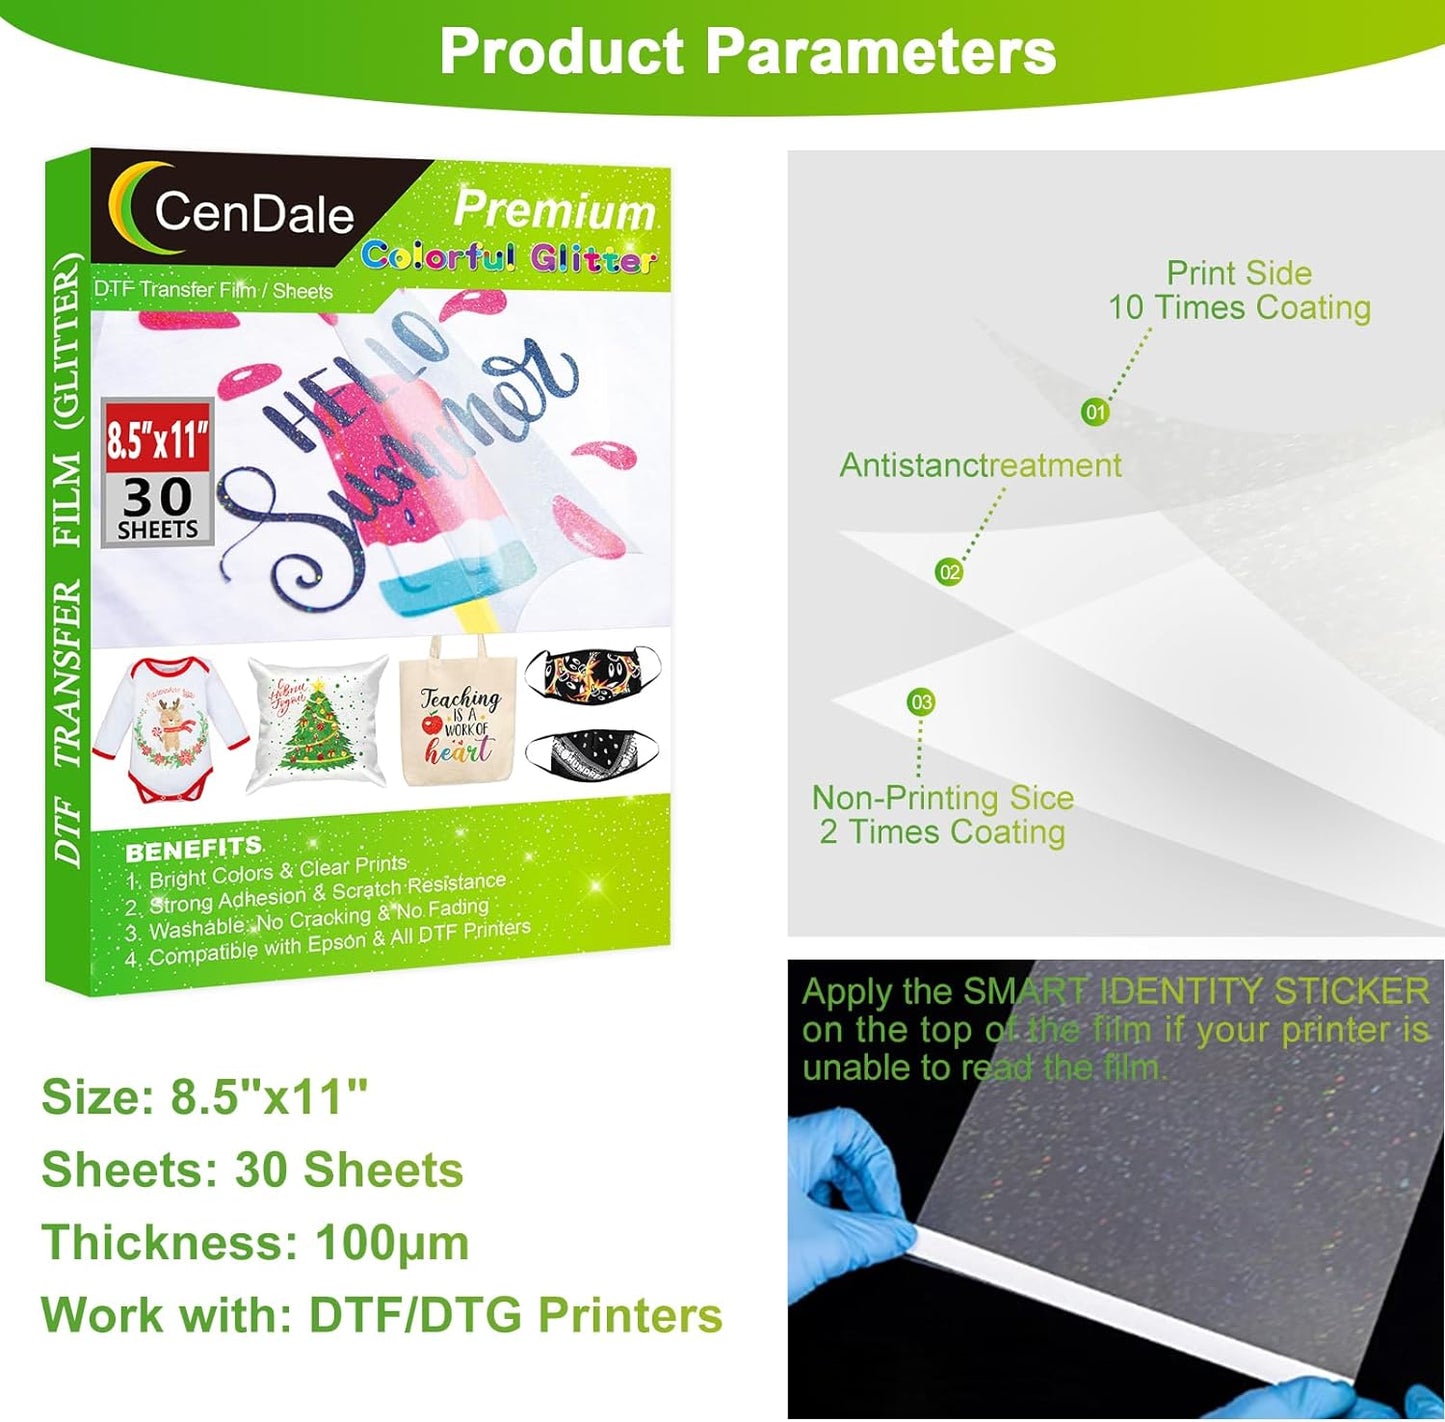 CenDale Glitter DTF Transfer Film - 8.5"x11" 30 Sheets Colorful Glitter DTF Film for Sublimation Hack, Direct to Film Printing